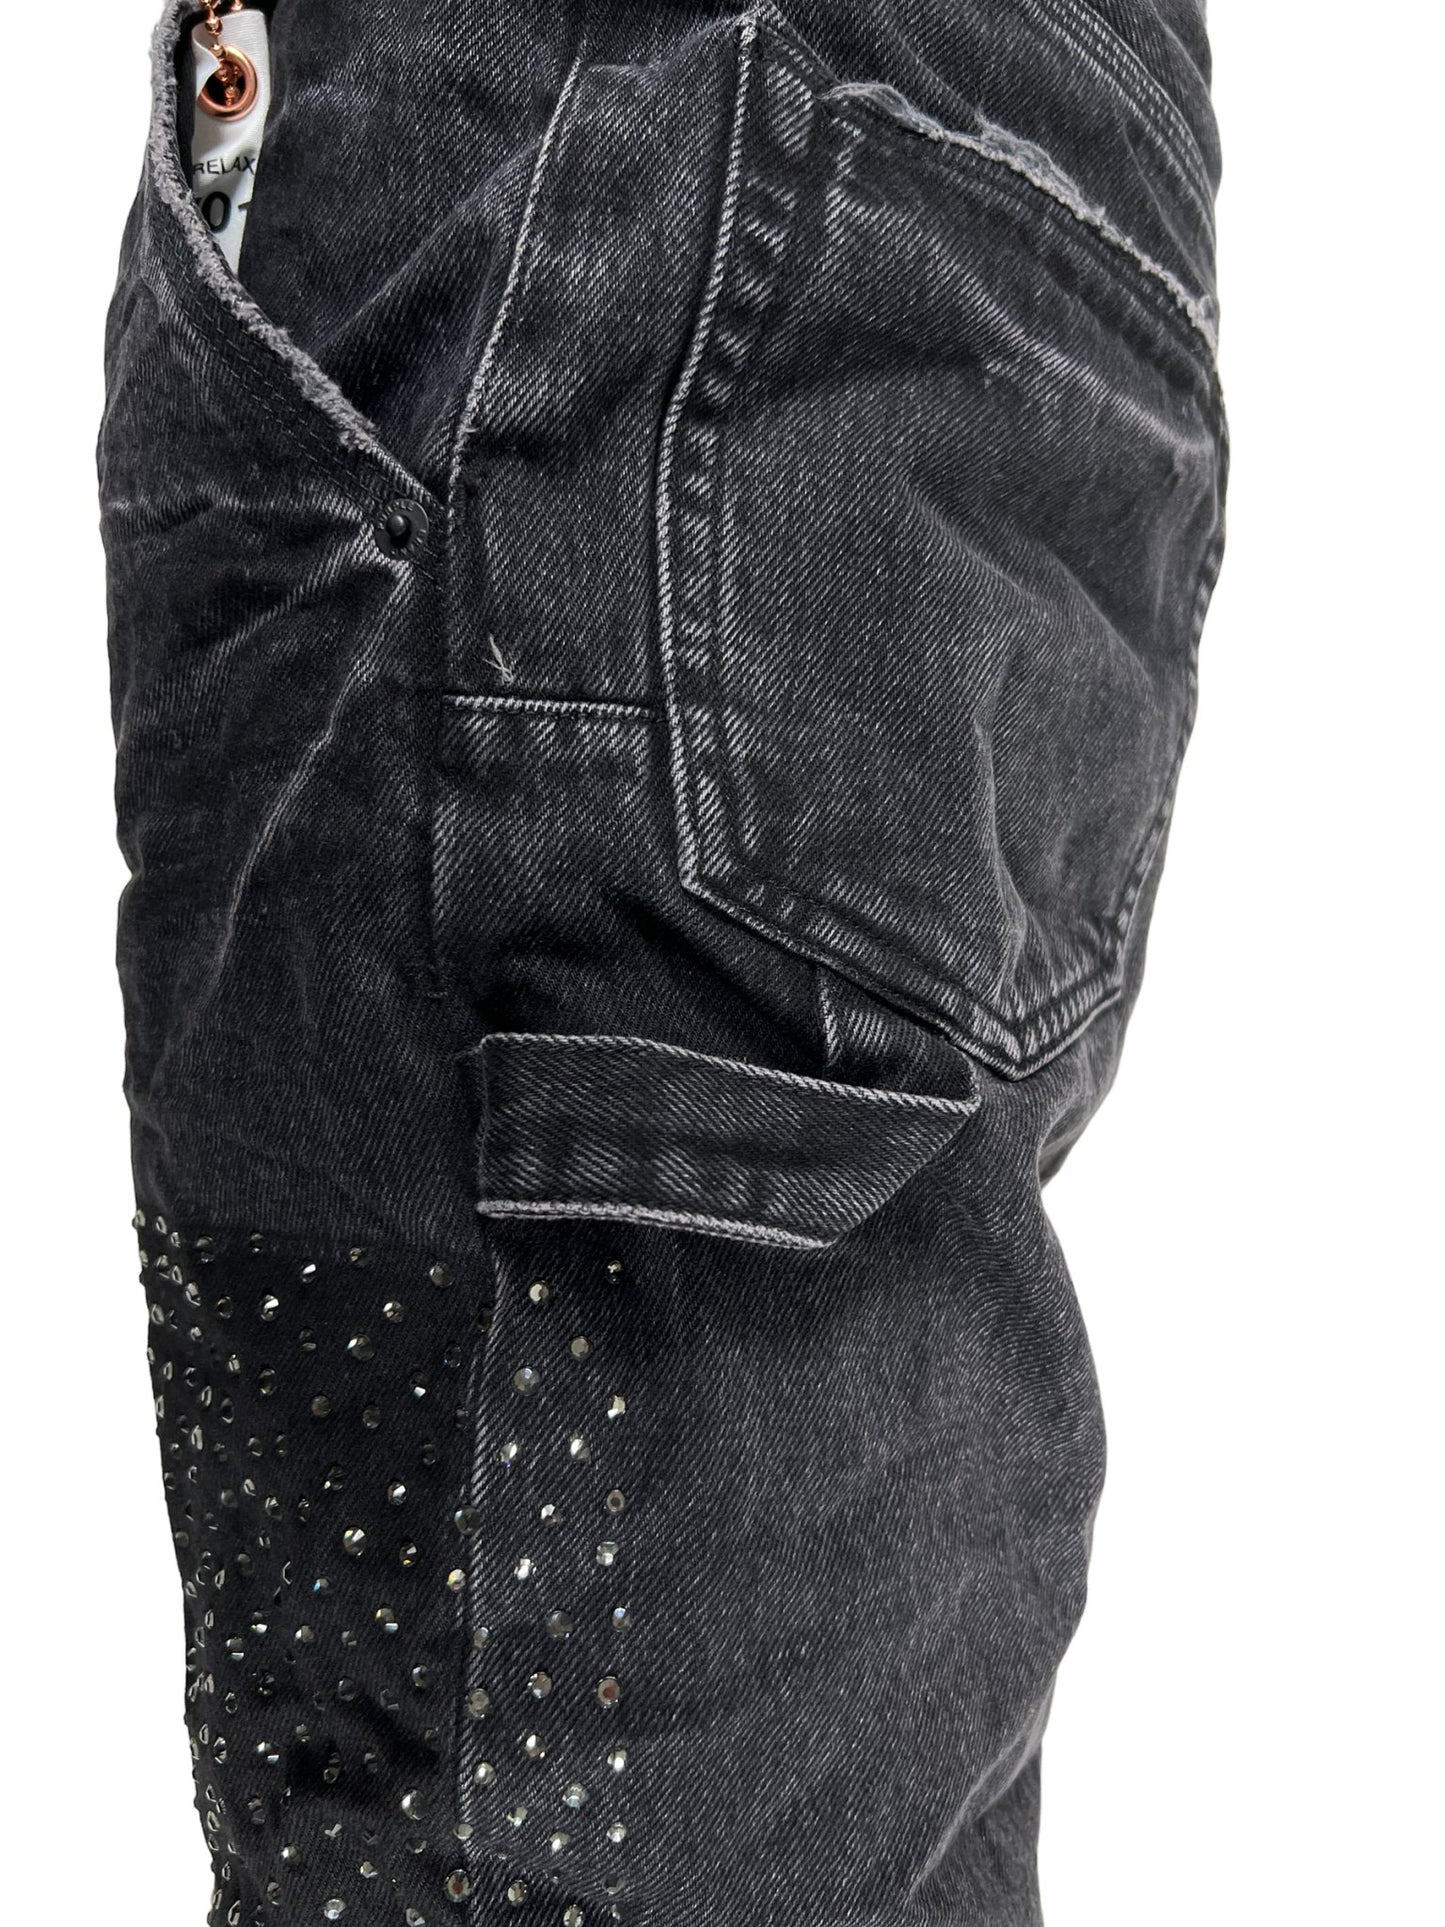 A pair of PURPLE BRAND JEANS P015-CCBL CRYSTAL CARPENTER BLACK with crystal-studded pockets.